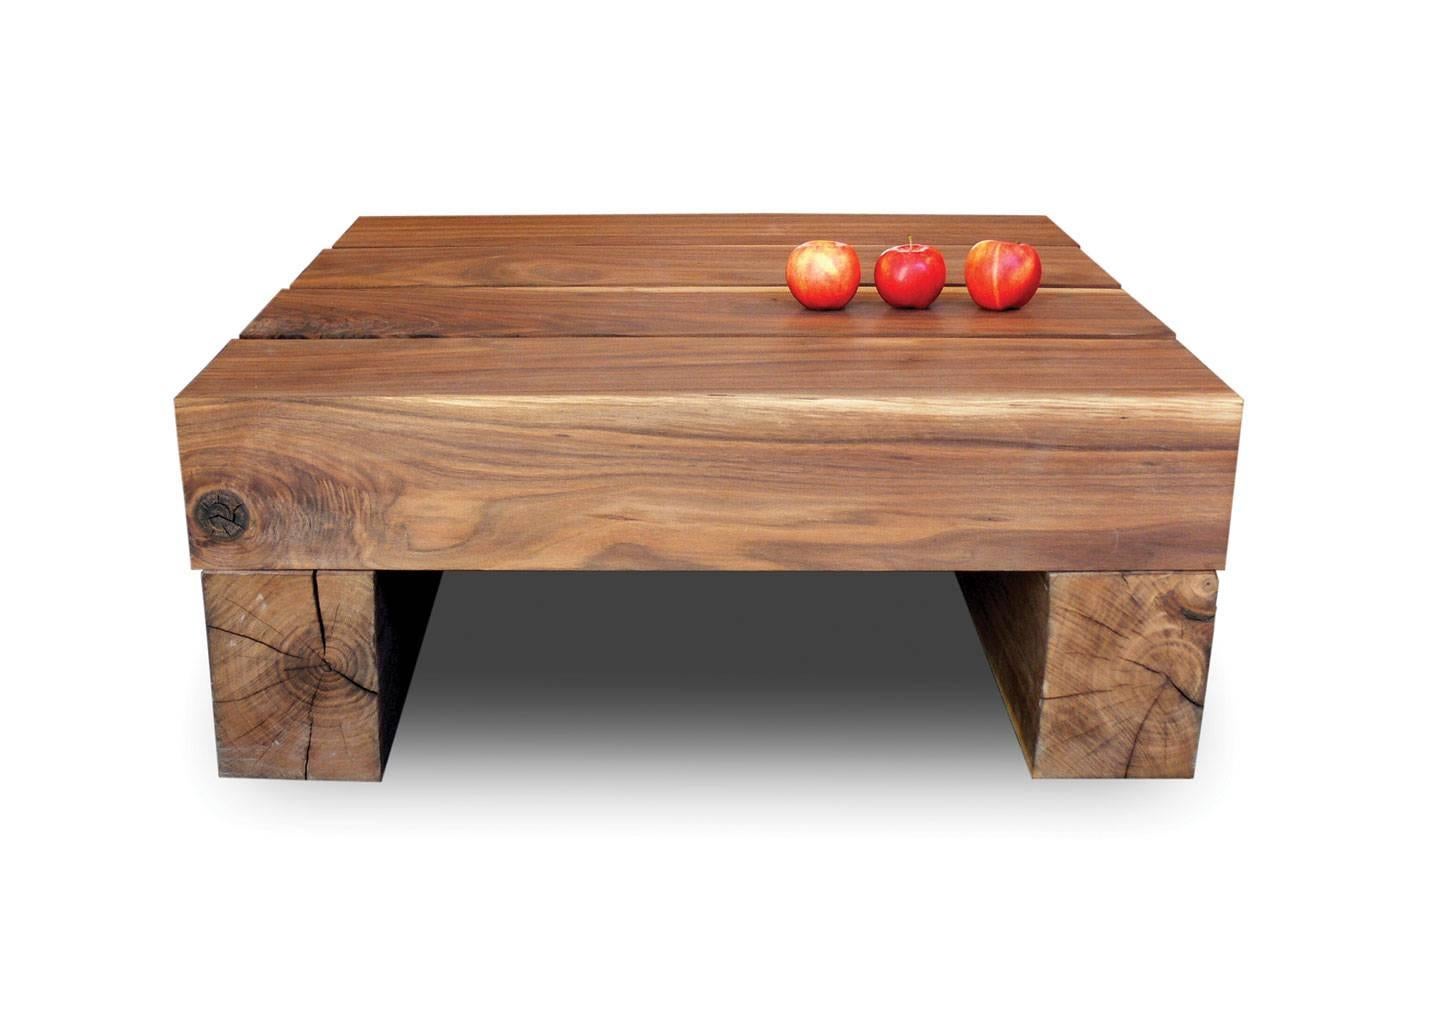 Inspired by the legs of our beam series sofa, this rustic coffee table is made up of six timbers layed out without hardware, using gravity and the weight of the wood itself to stay together. Simple design and beautiful grain come together here to